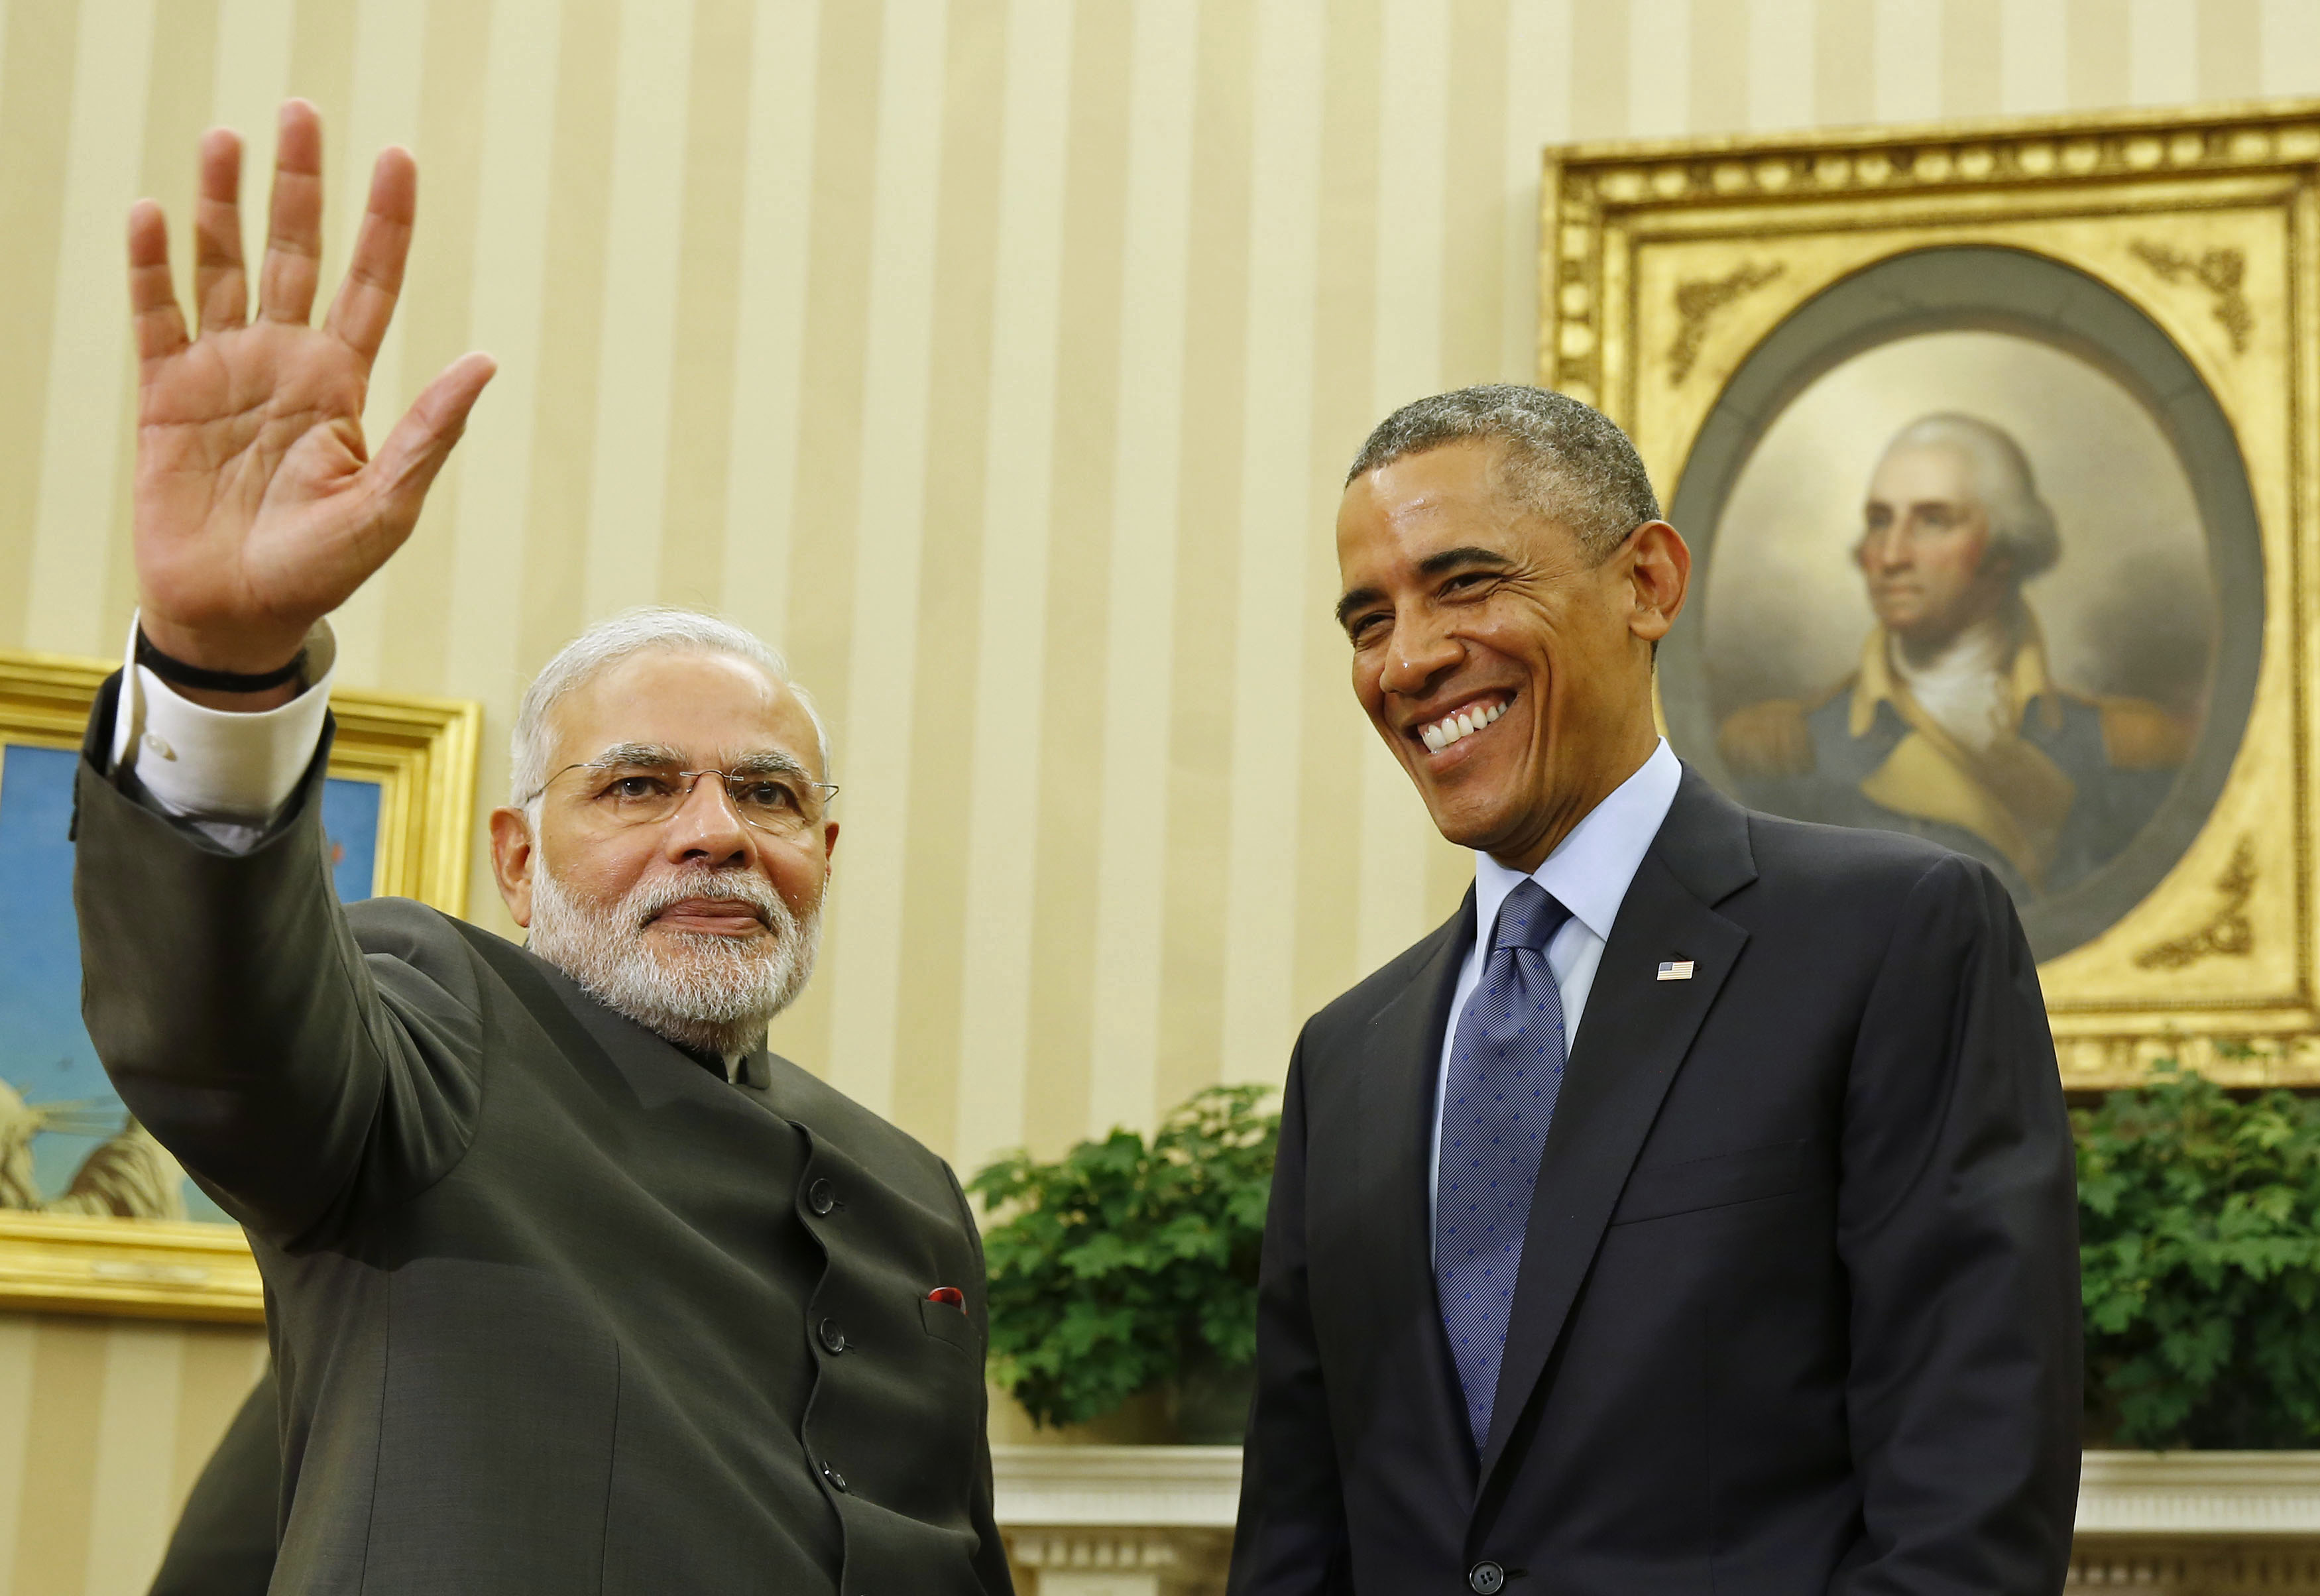 U.S. President Barack Obama smiles as he hosts a meeting with India's Prime Minister Narendra Modi in the Oval Office of the White House in Washington September 30, 2014. (Larry Downing—Reuters)